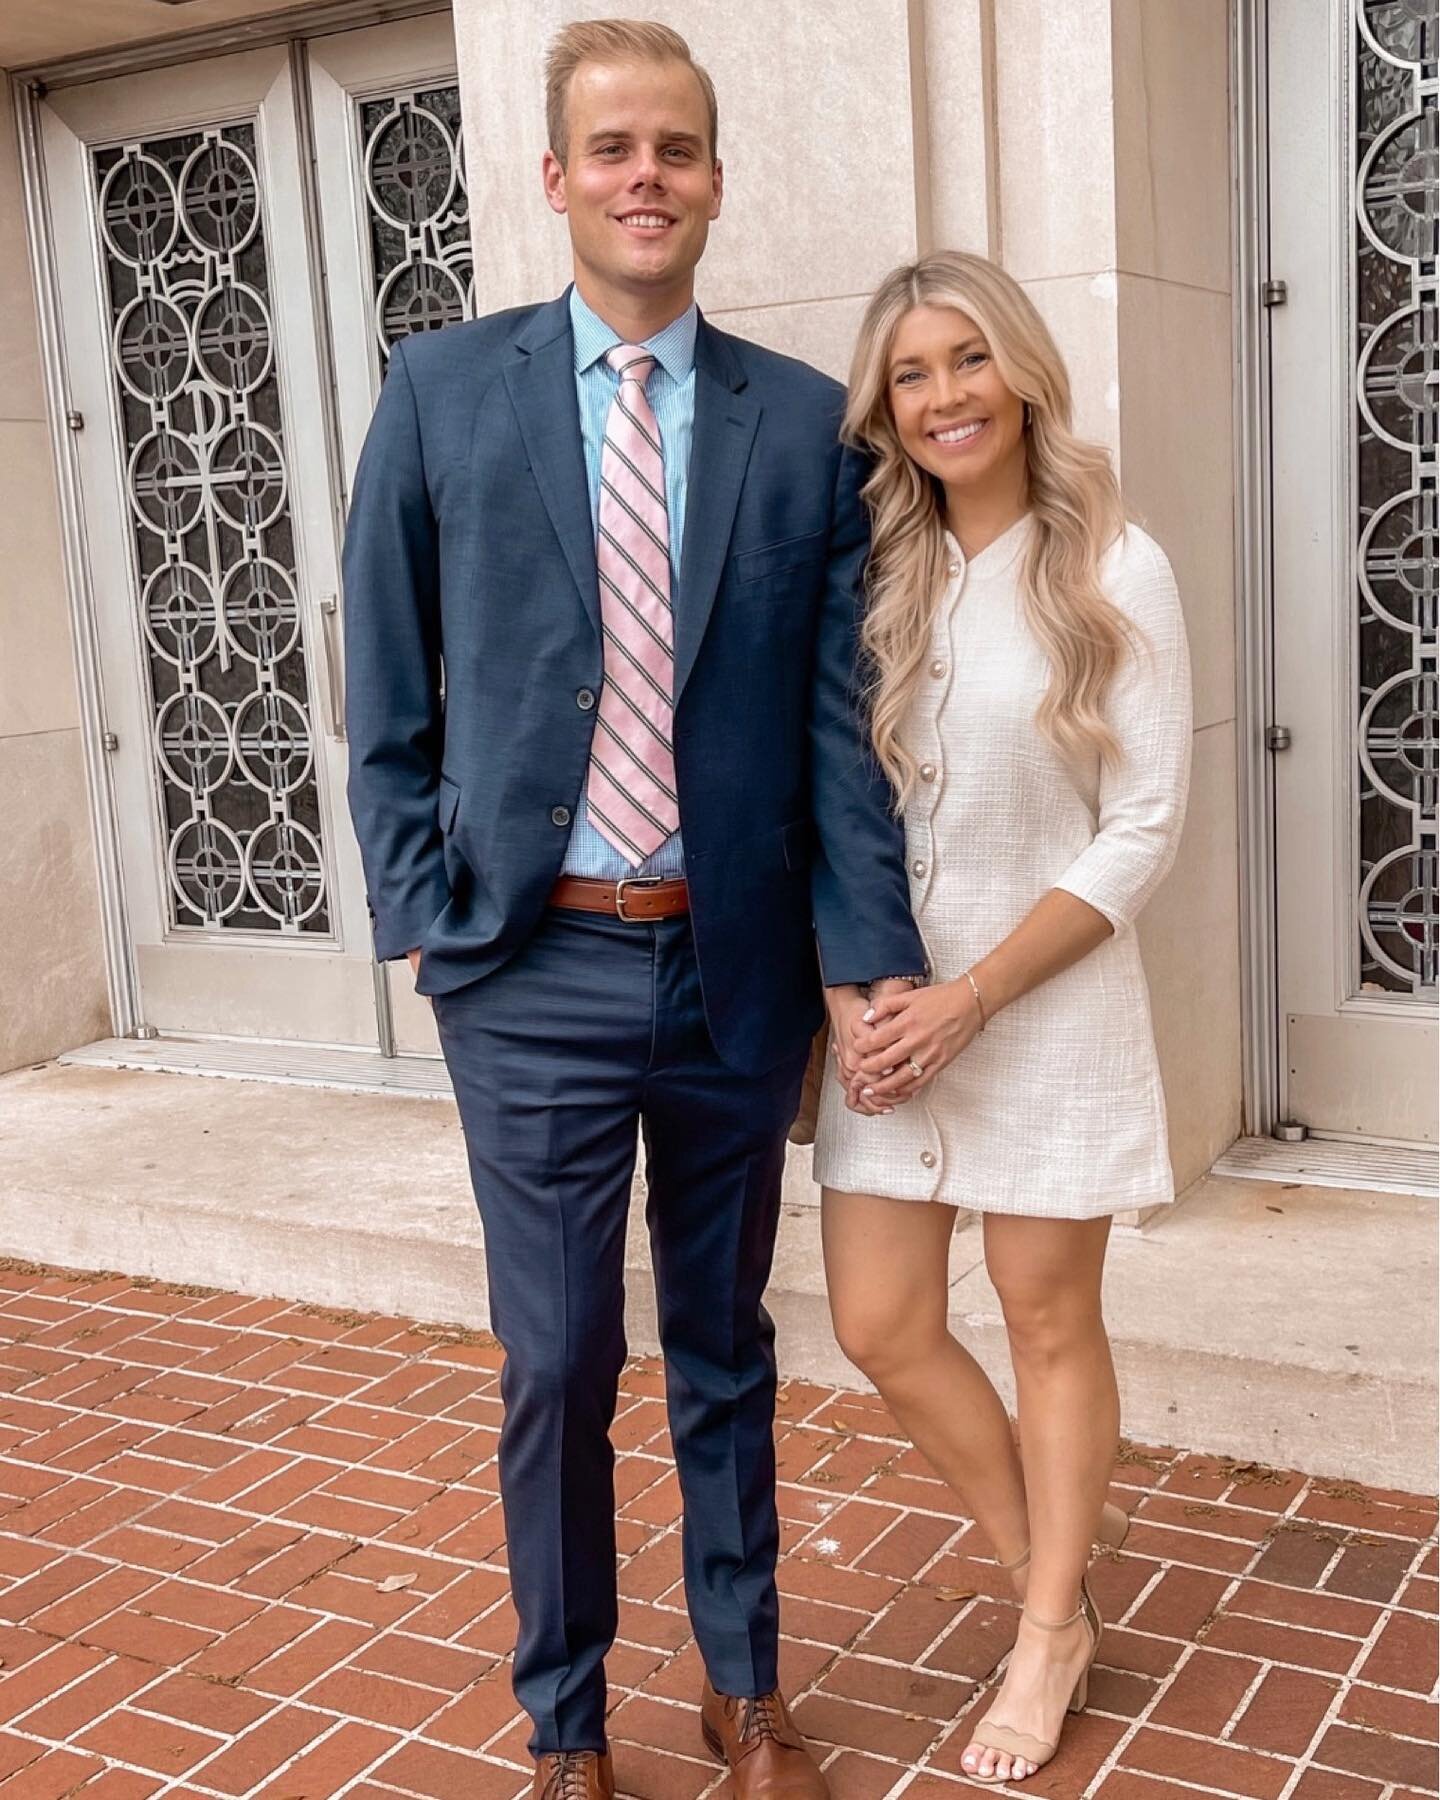 Our happiest Easter yet🤍! This weekend was extra special as Chris was baptized and confirmed into the Catholic Church. Such a wonderful gift to our future together and such a great weekend with our families🤍 I am so proud of this man and grateful f